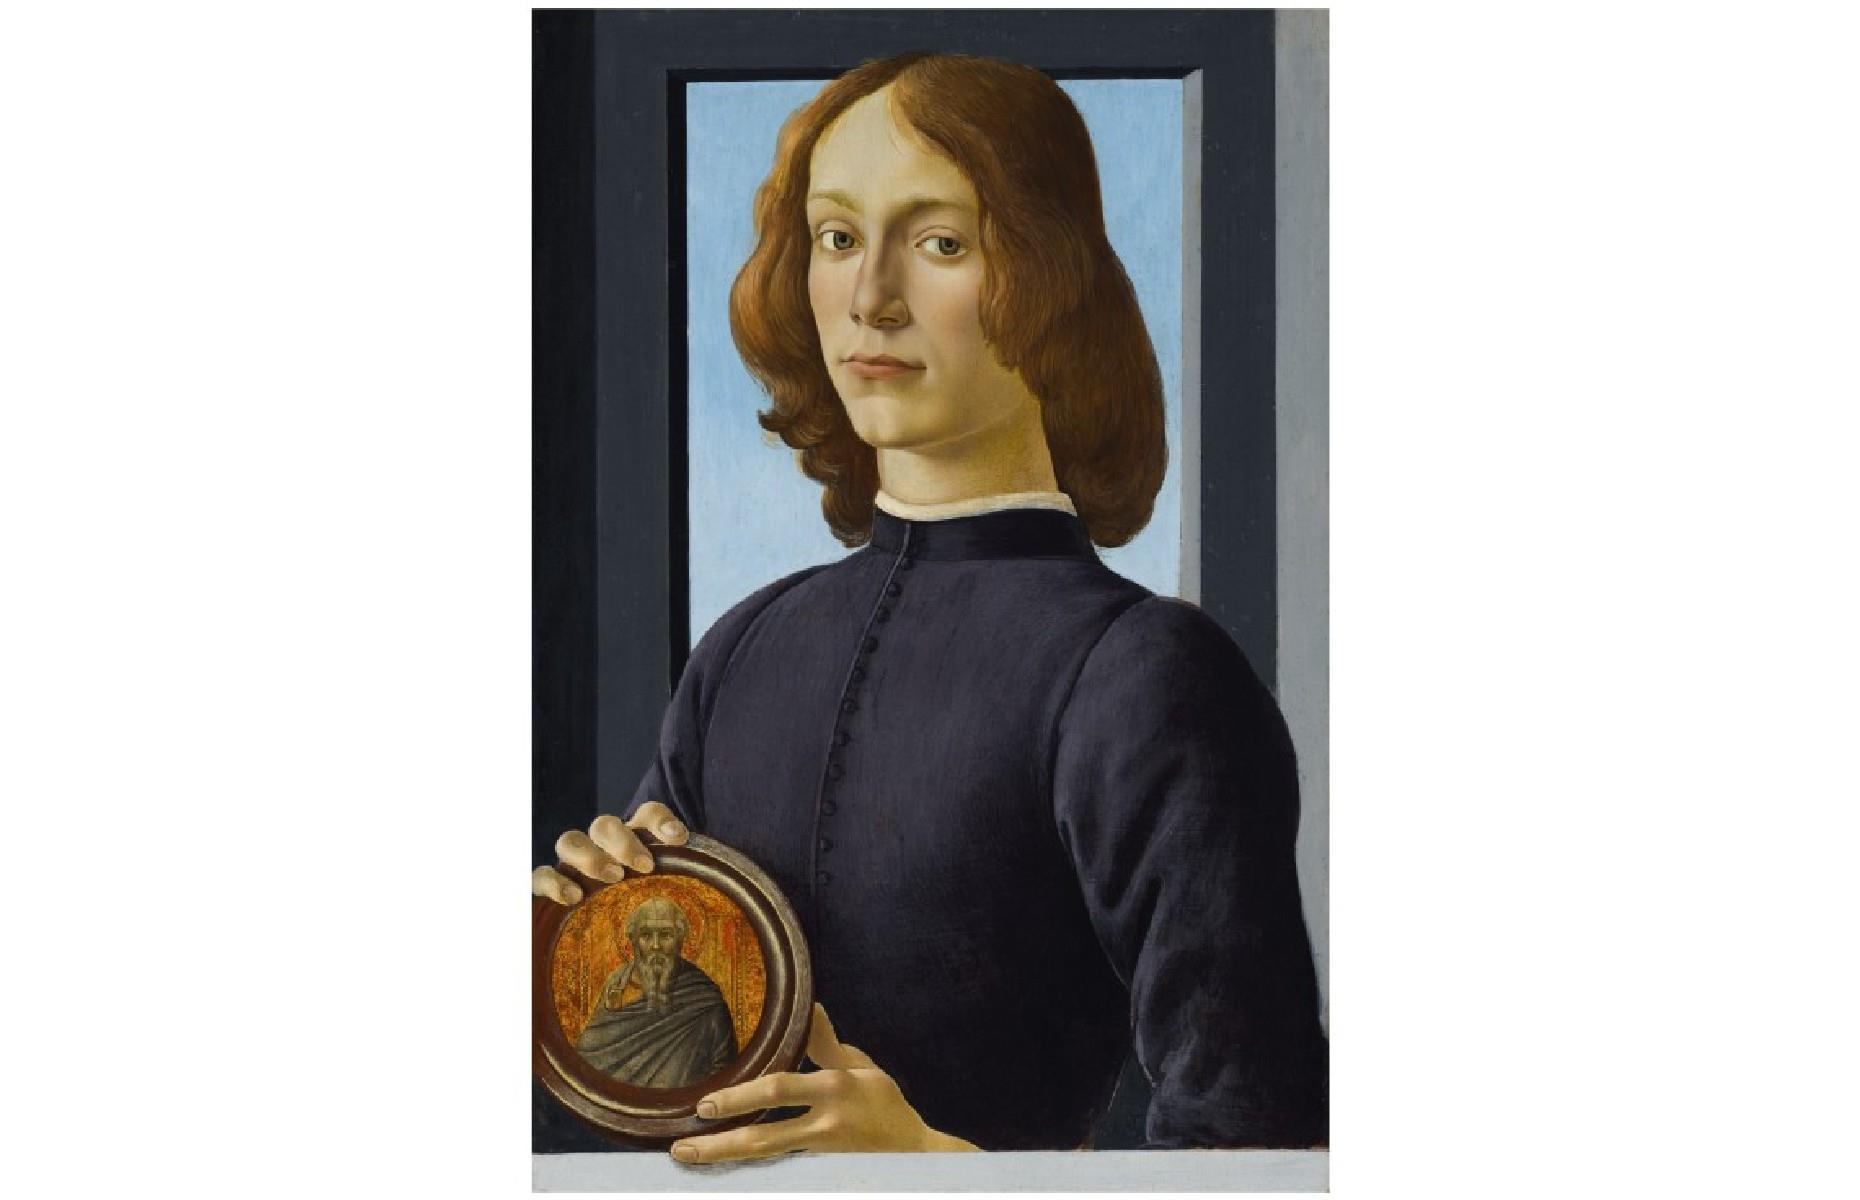 Sandro Botticelli’s Young Man Holding A Roundel: $92.2 million (£69.4m)